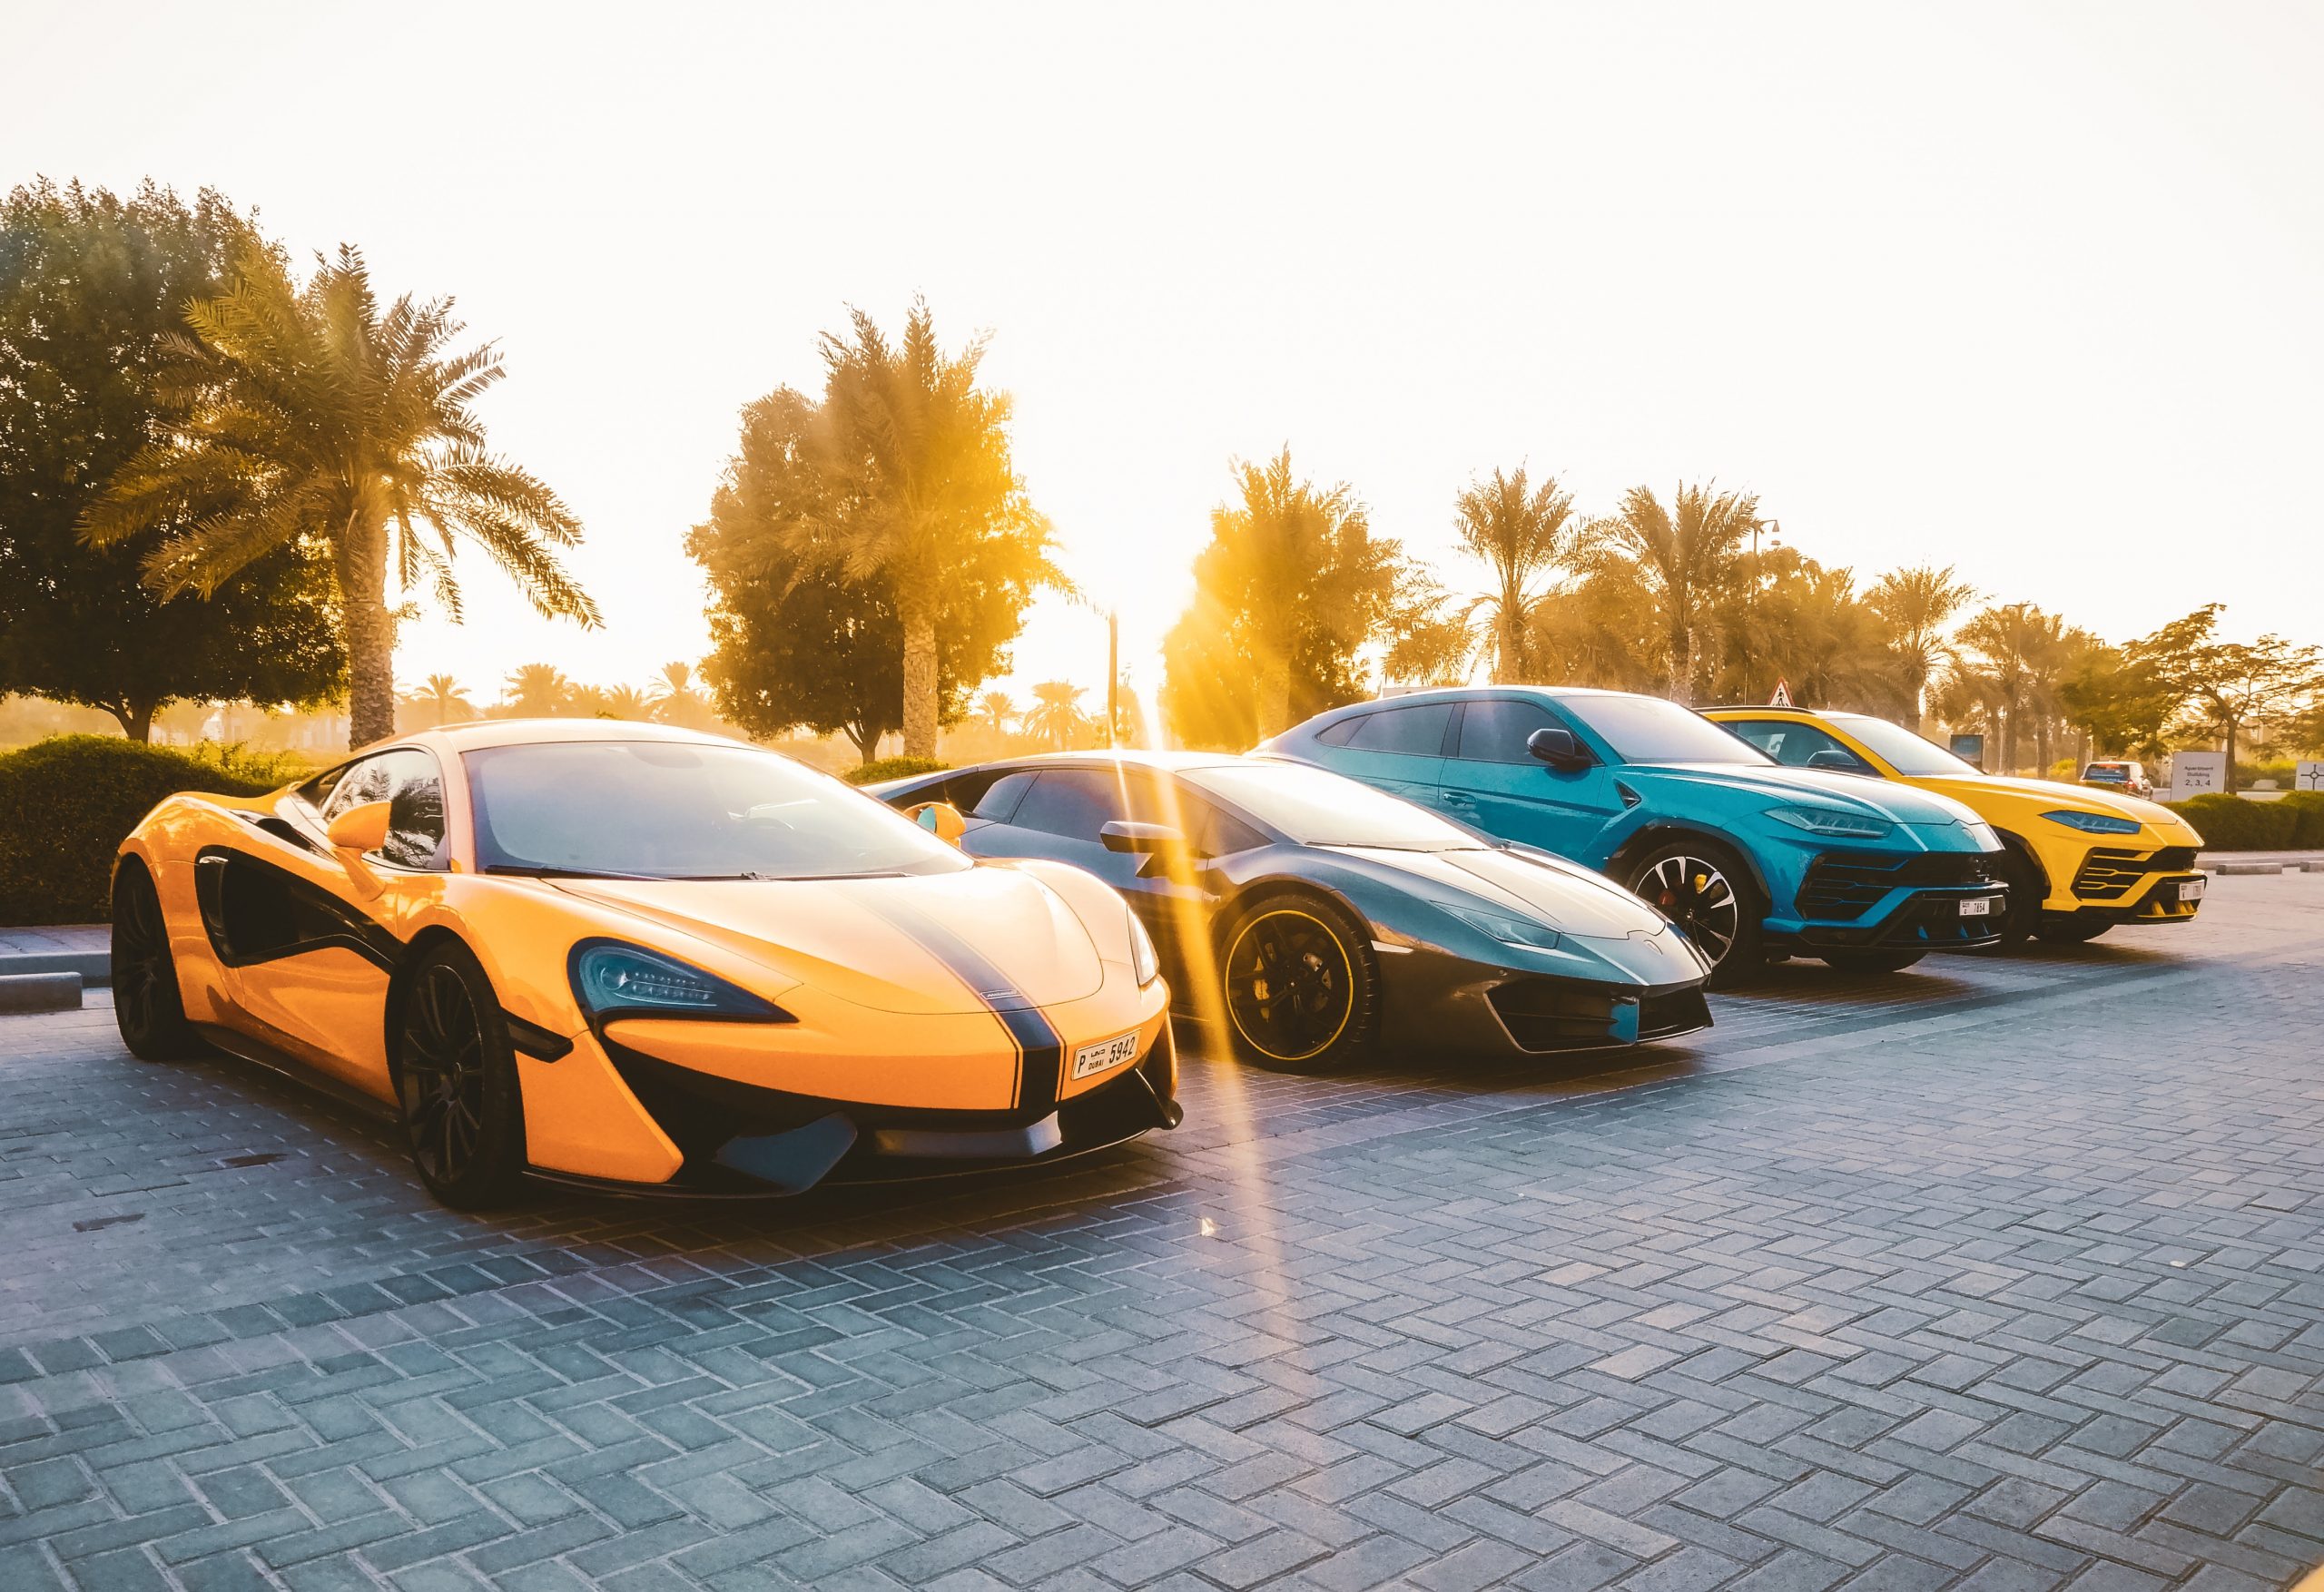 Row of Exotic Cars